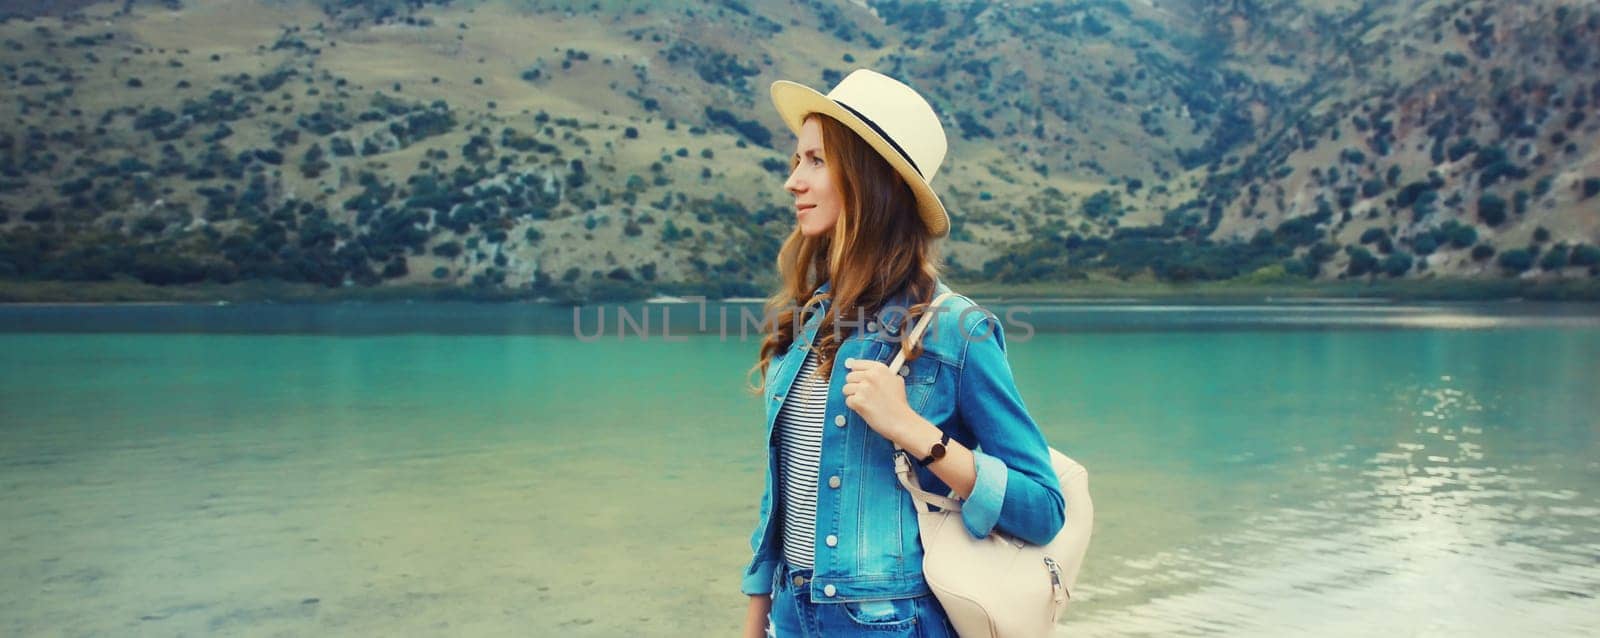 Summer vacation, young woman tourist in straw hat with backpack on lake and mountains background. Greece, island Crete